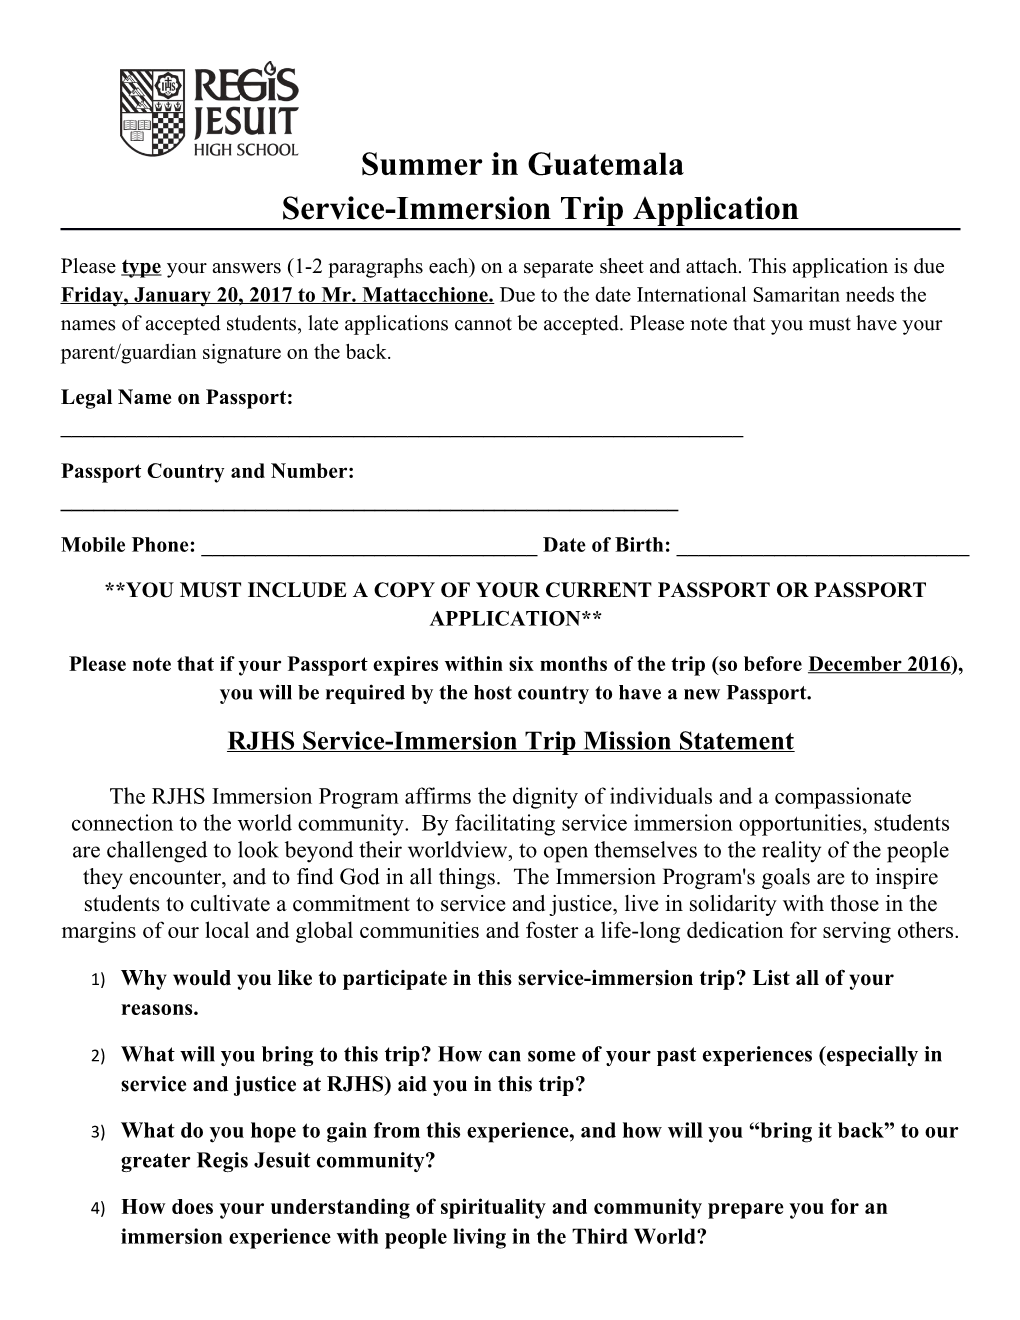 Summer in Guatemala Service-Immersion Trip Application